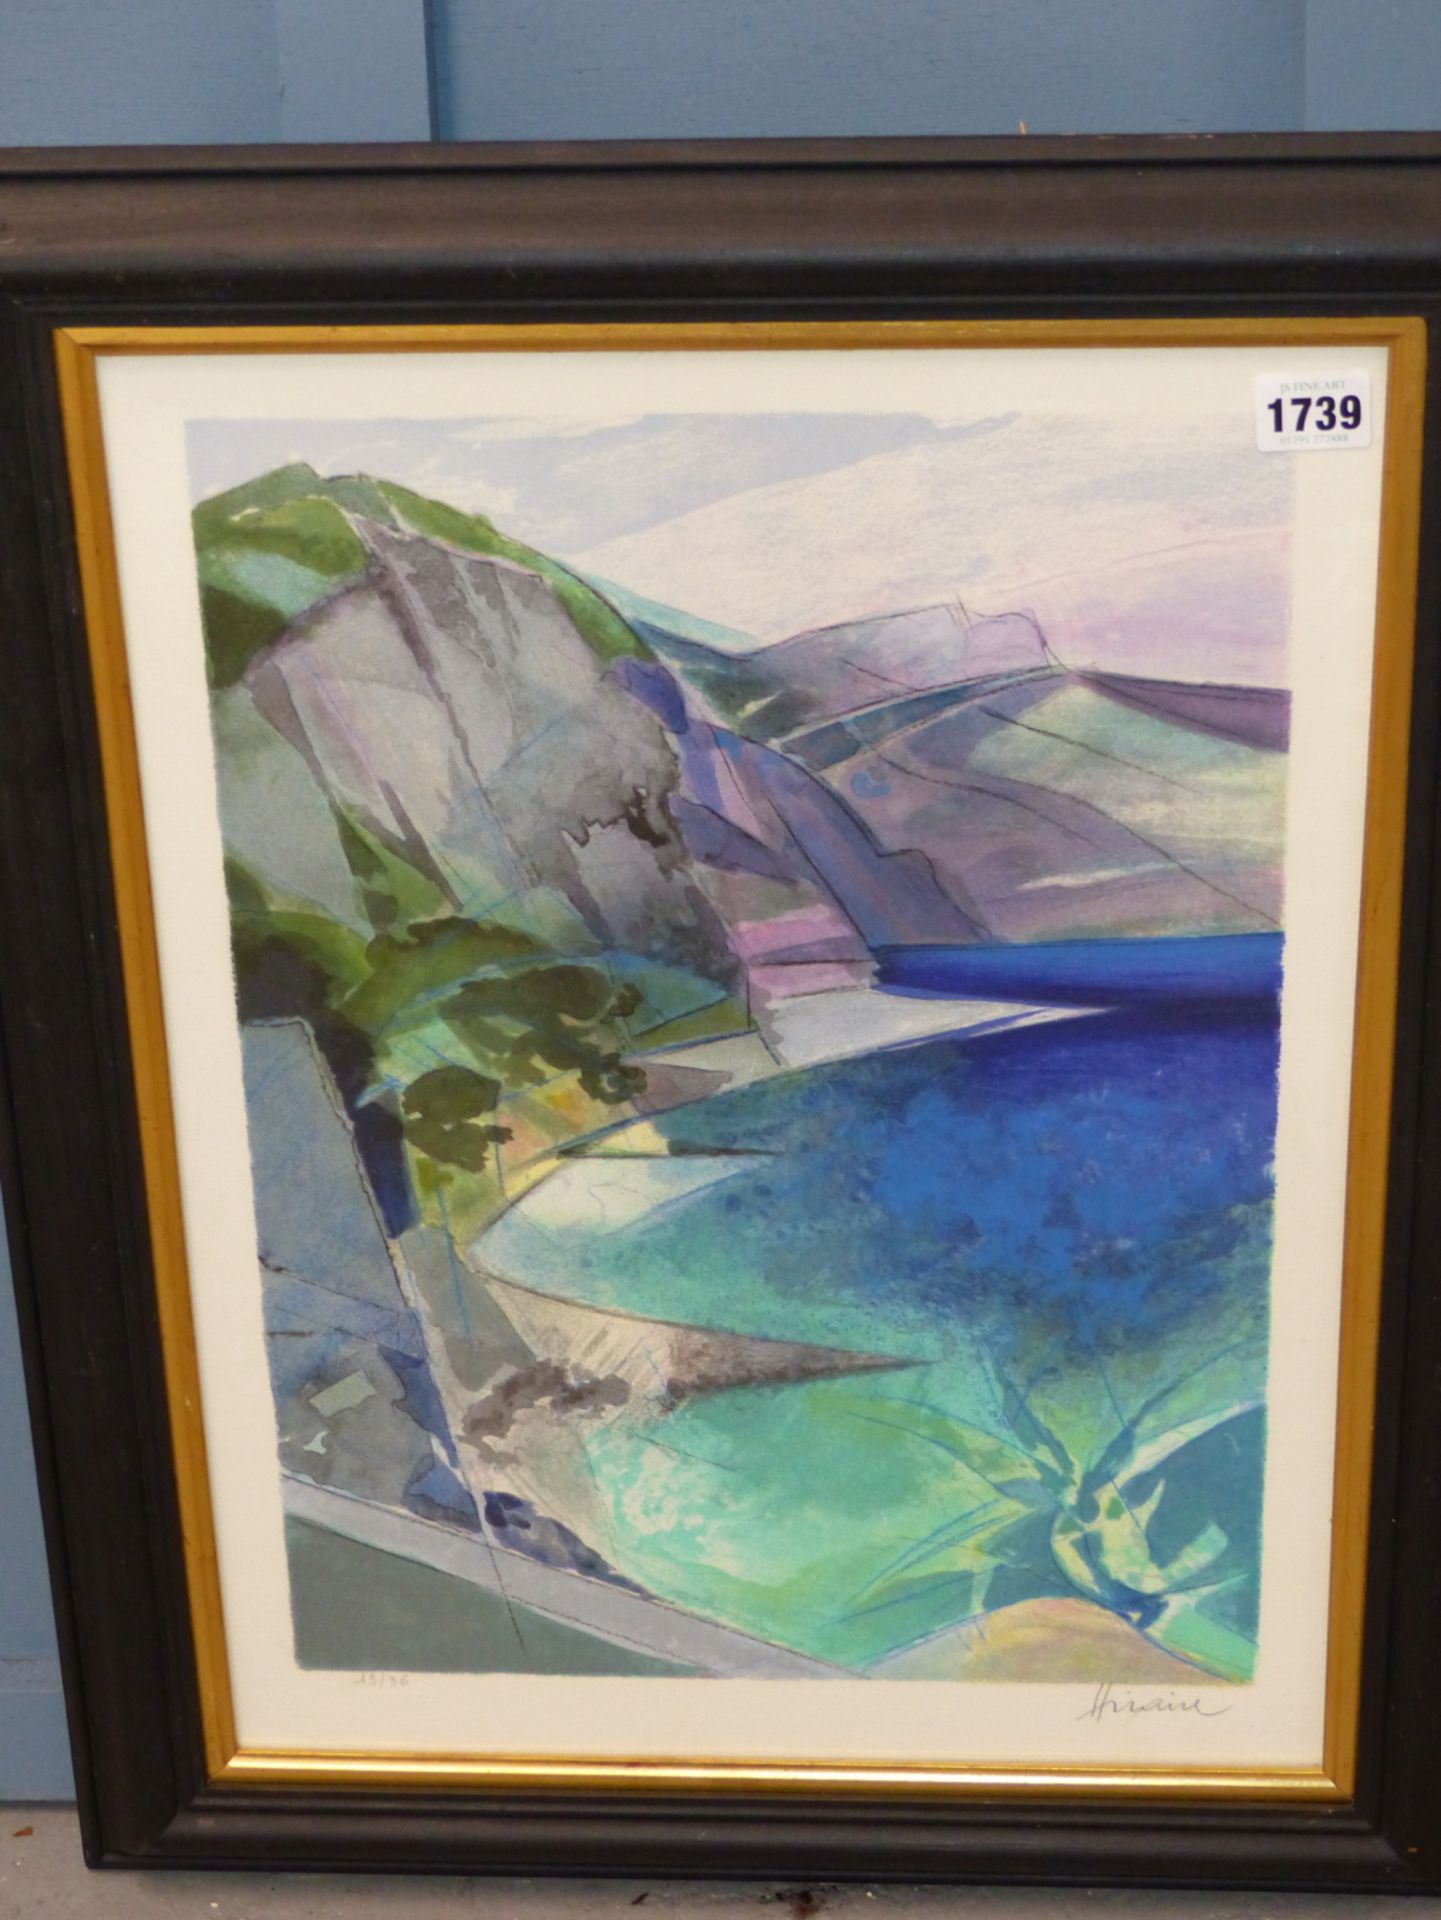 CAMILLE HILAIRE, FRENCH 1916-2004. "LES CALANQUES" NUMBERED EDITION 13/36, SIGNED IN PENCIL. - Image 2 of 6